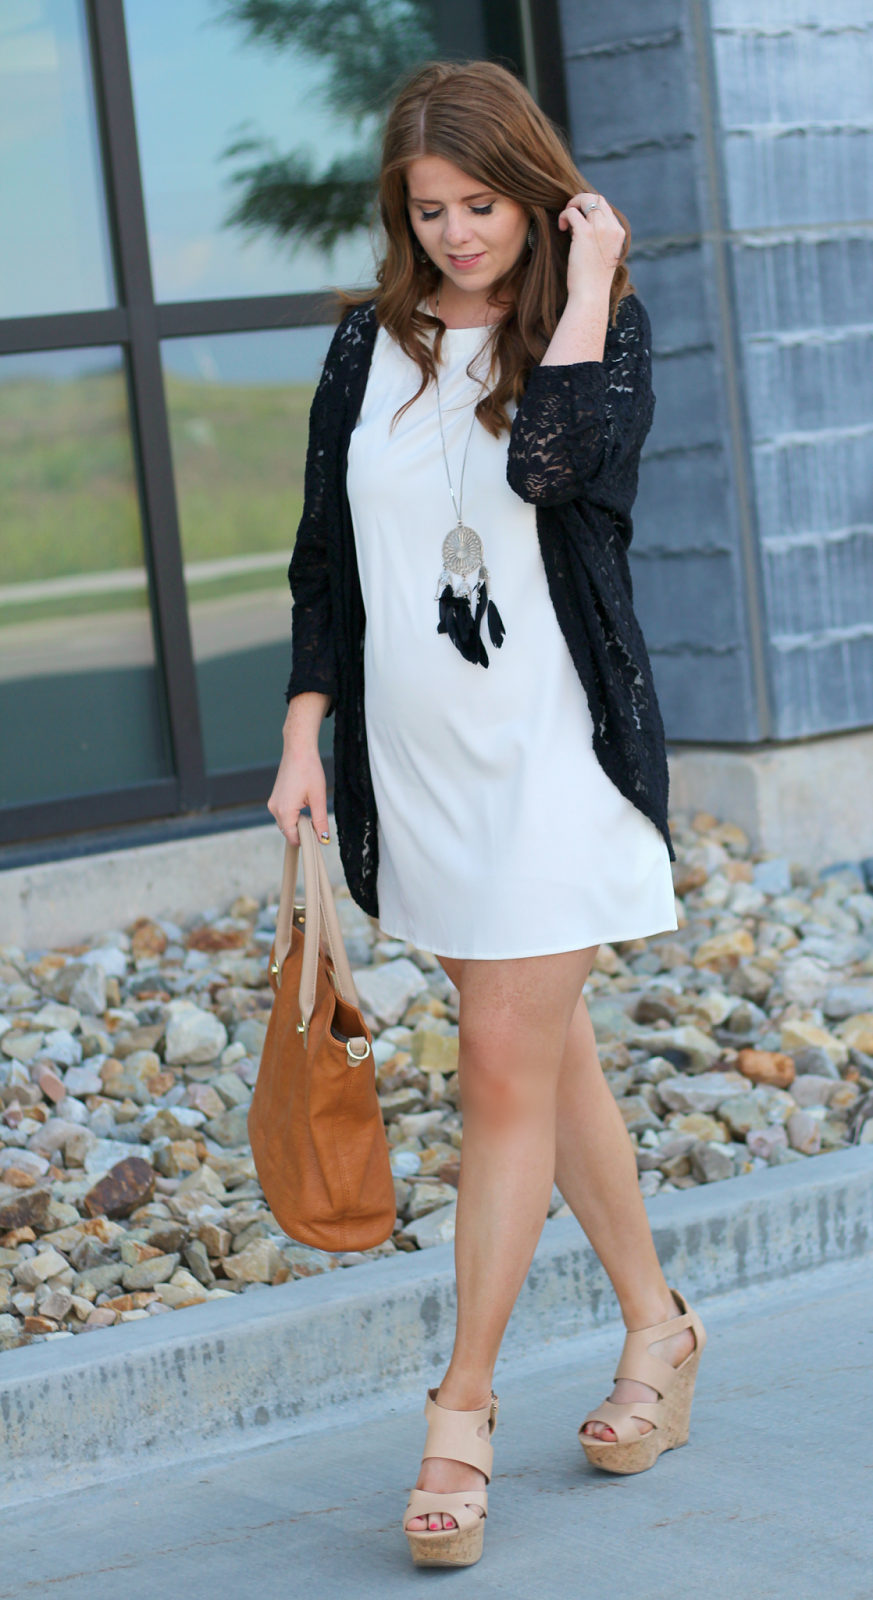 White Dress Black Lace Modest summer outfit